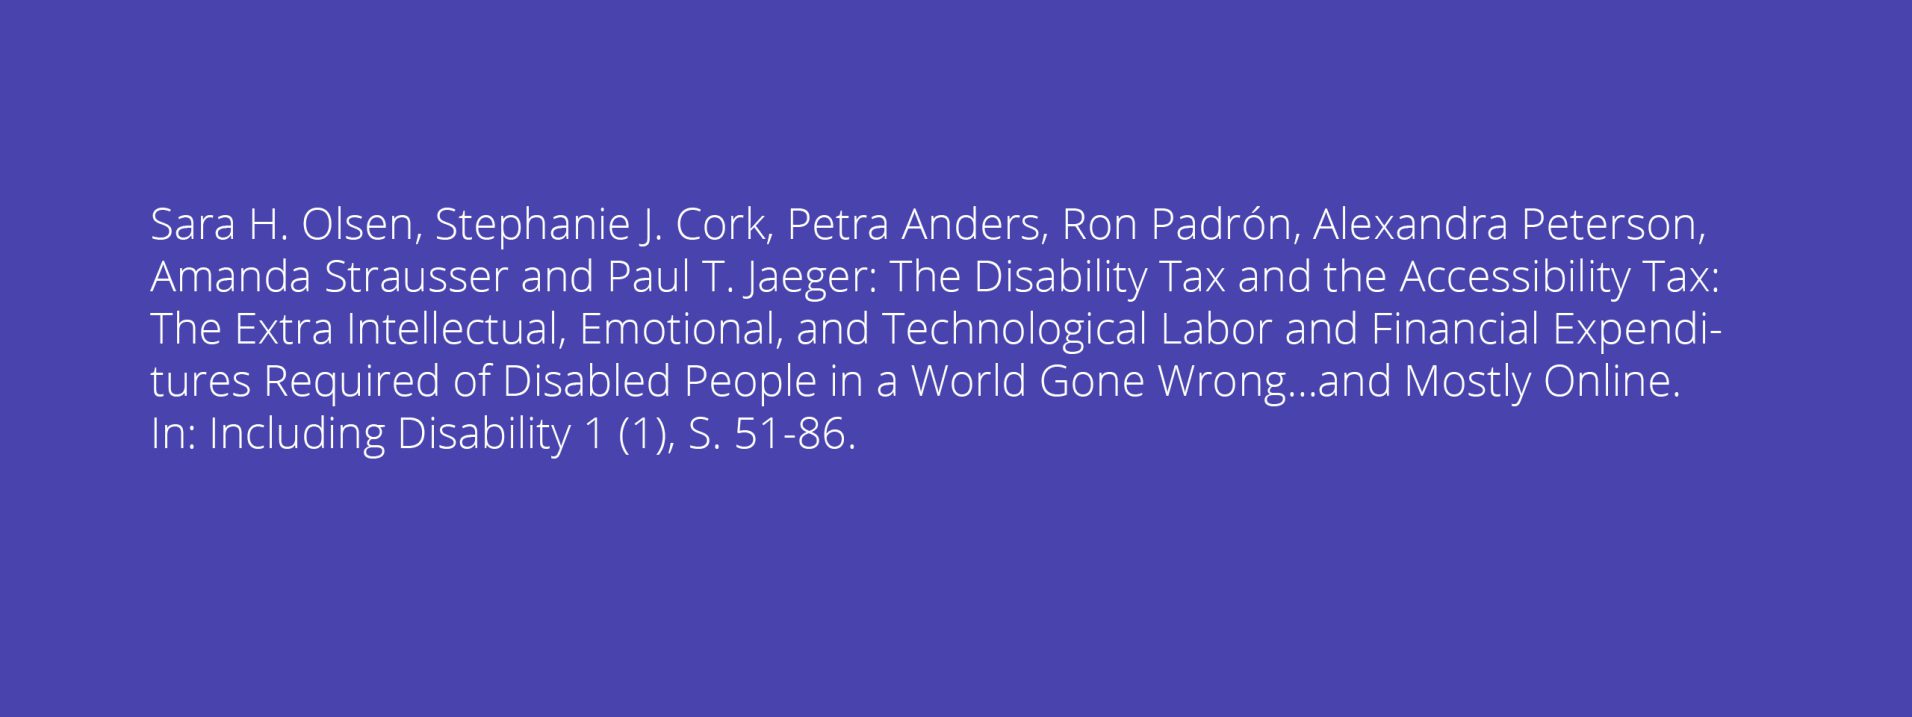 Sara H. Olsen, Stephanie J. Cork, Petra Anders, Ron Padrón, Alexandra Peterson, Amanda Strausser and Paul T. Jaeger: The Disability Tax and the Accessibility Tax: The Extra Intellectual, Emotional, and Technological Labor and Financial Expenditures Required of Disabled People in a World Gone Wrong…and Mostly Online. In: Including Disability 1 (1), S. 51-86.